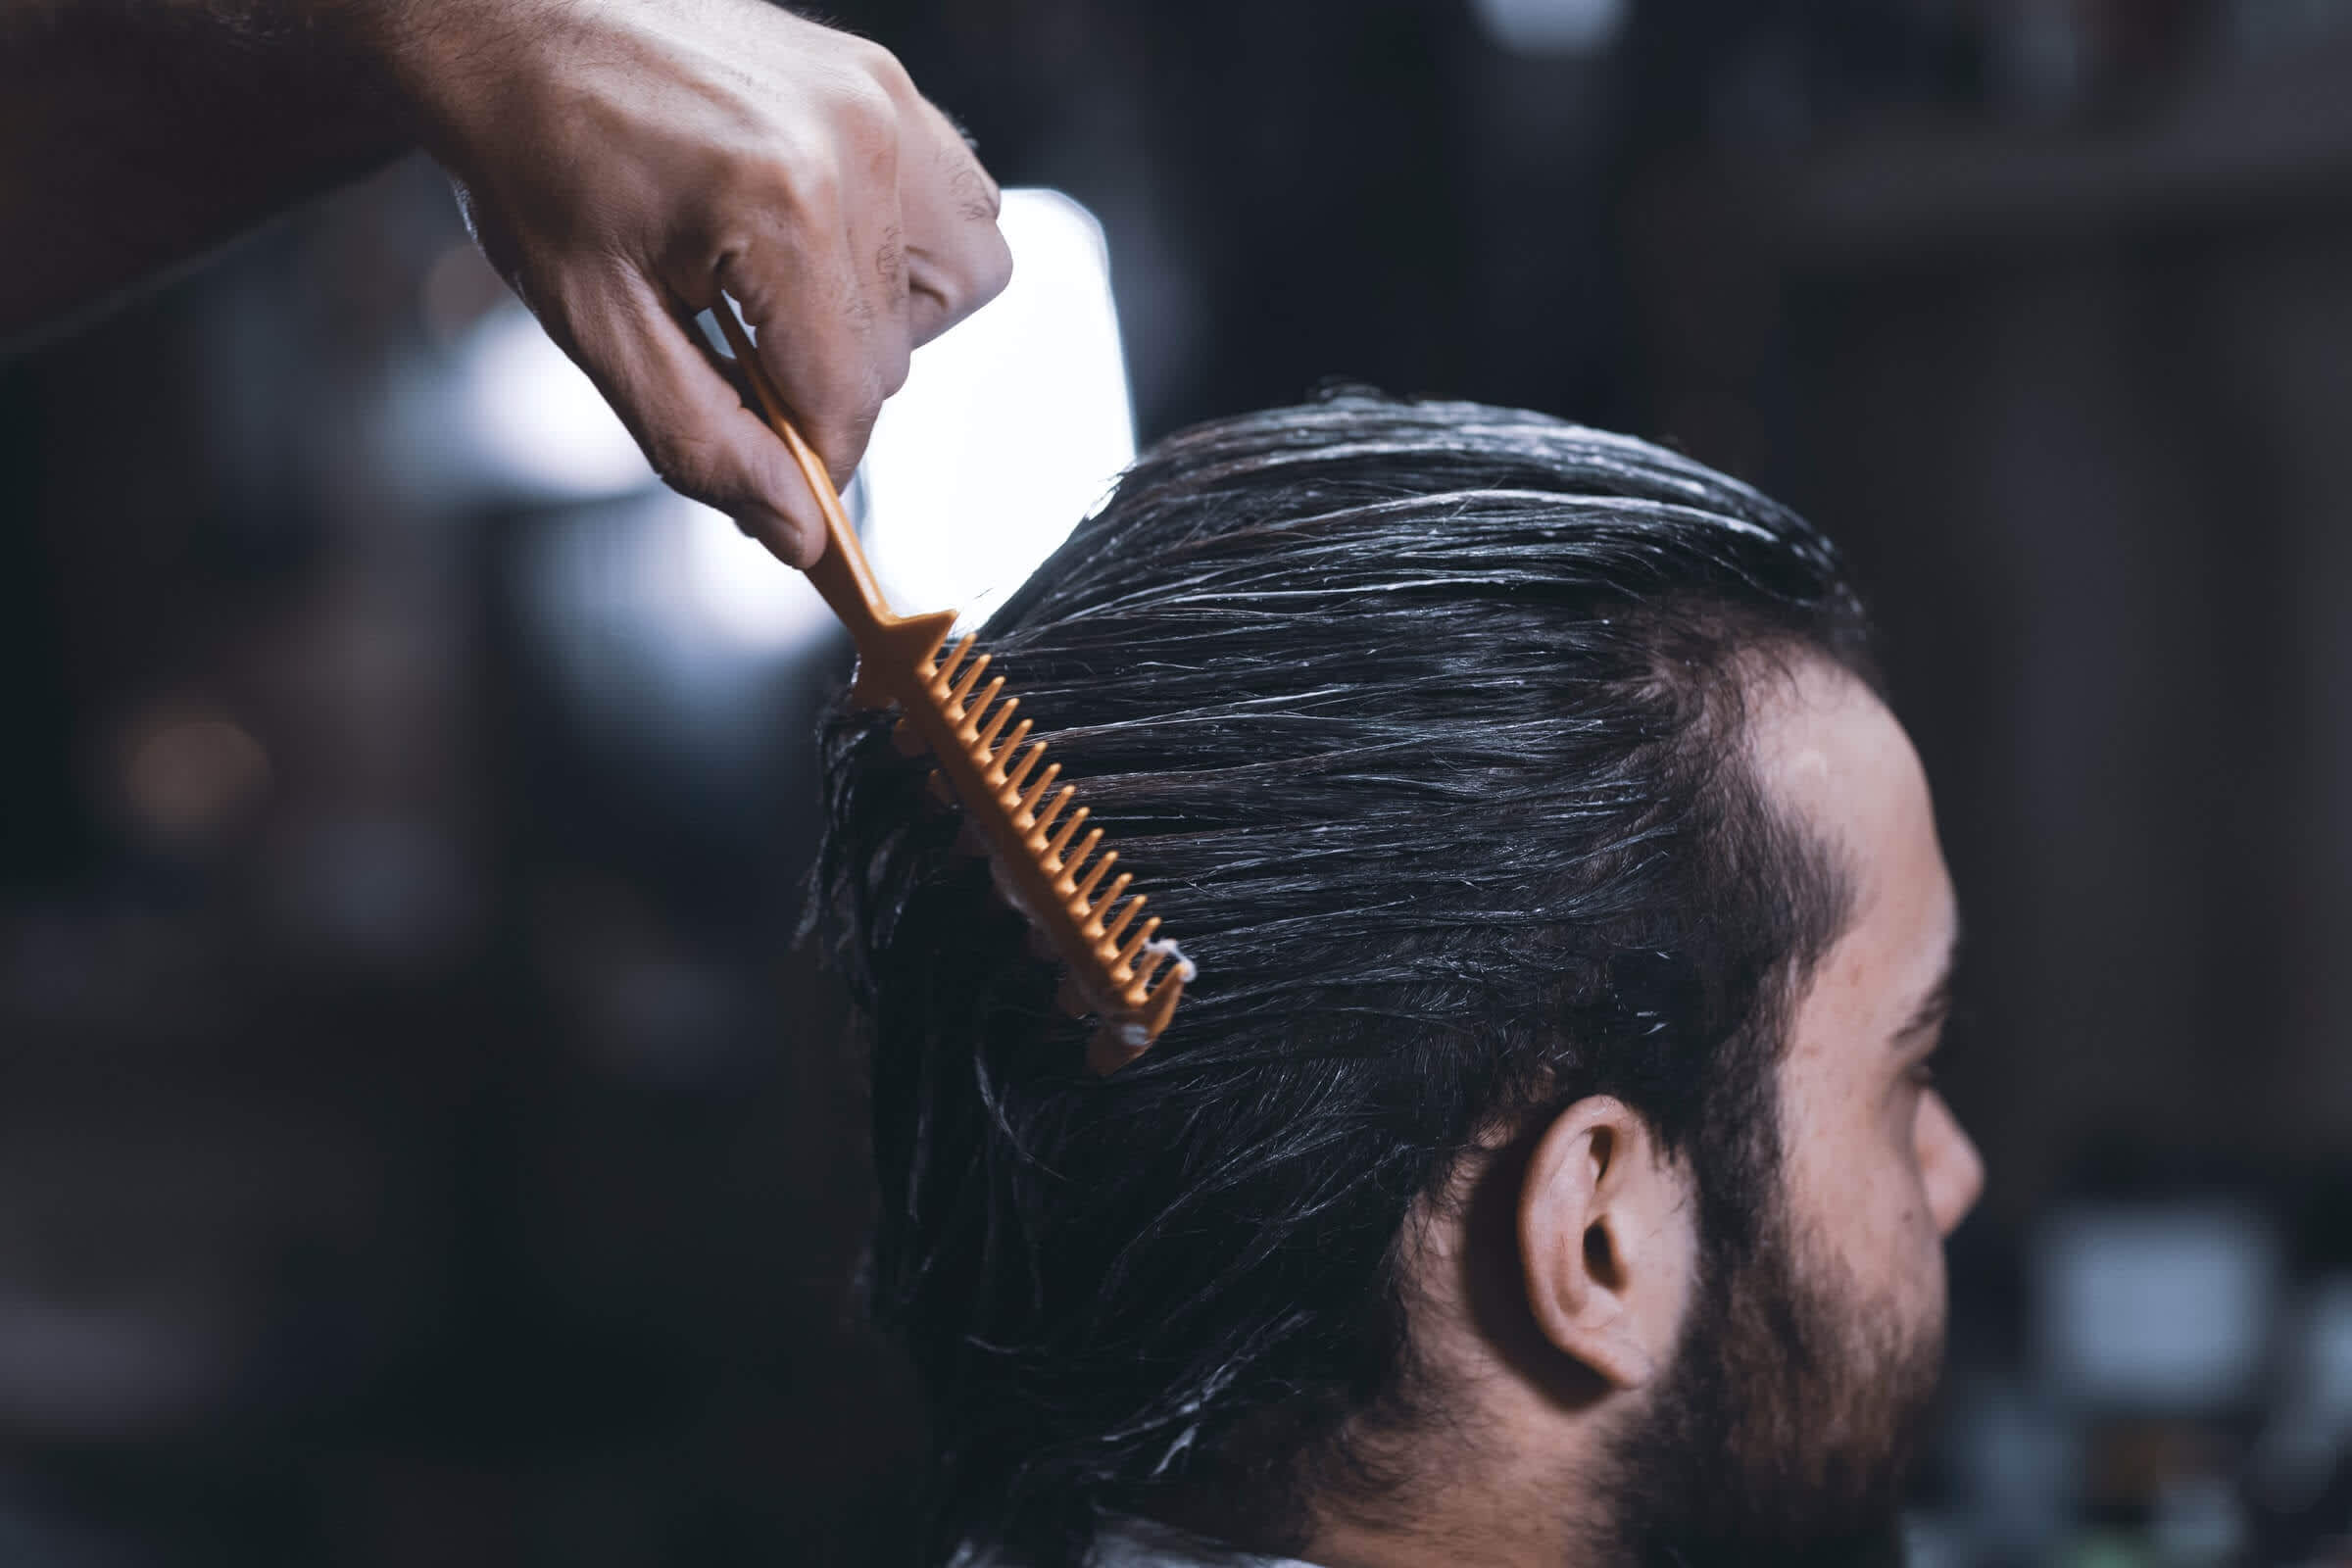 Barber applying shampoo for man's hair care and brushing with comb at barbershop